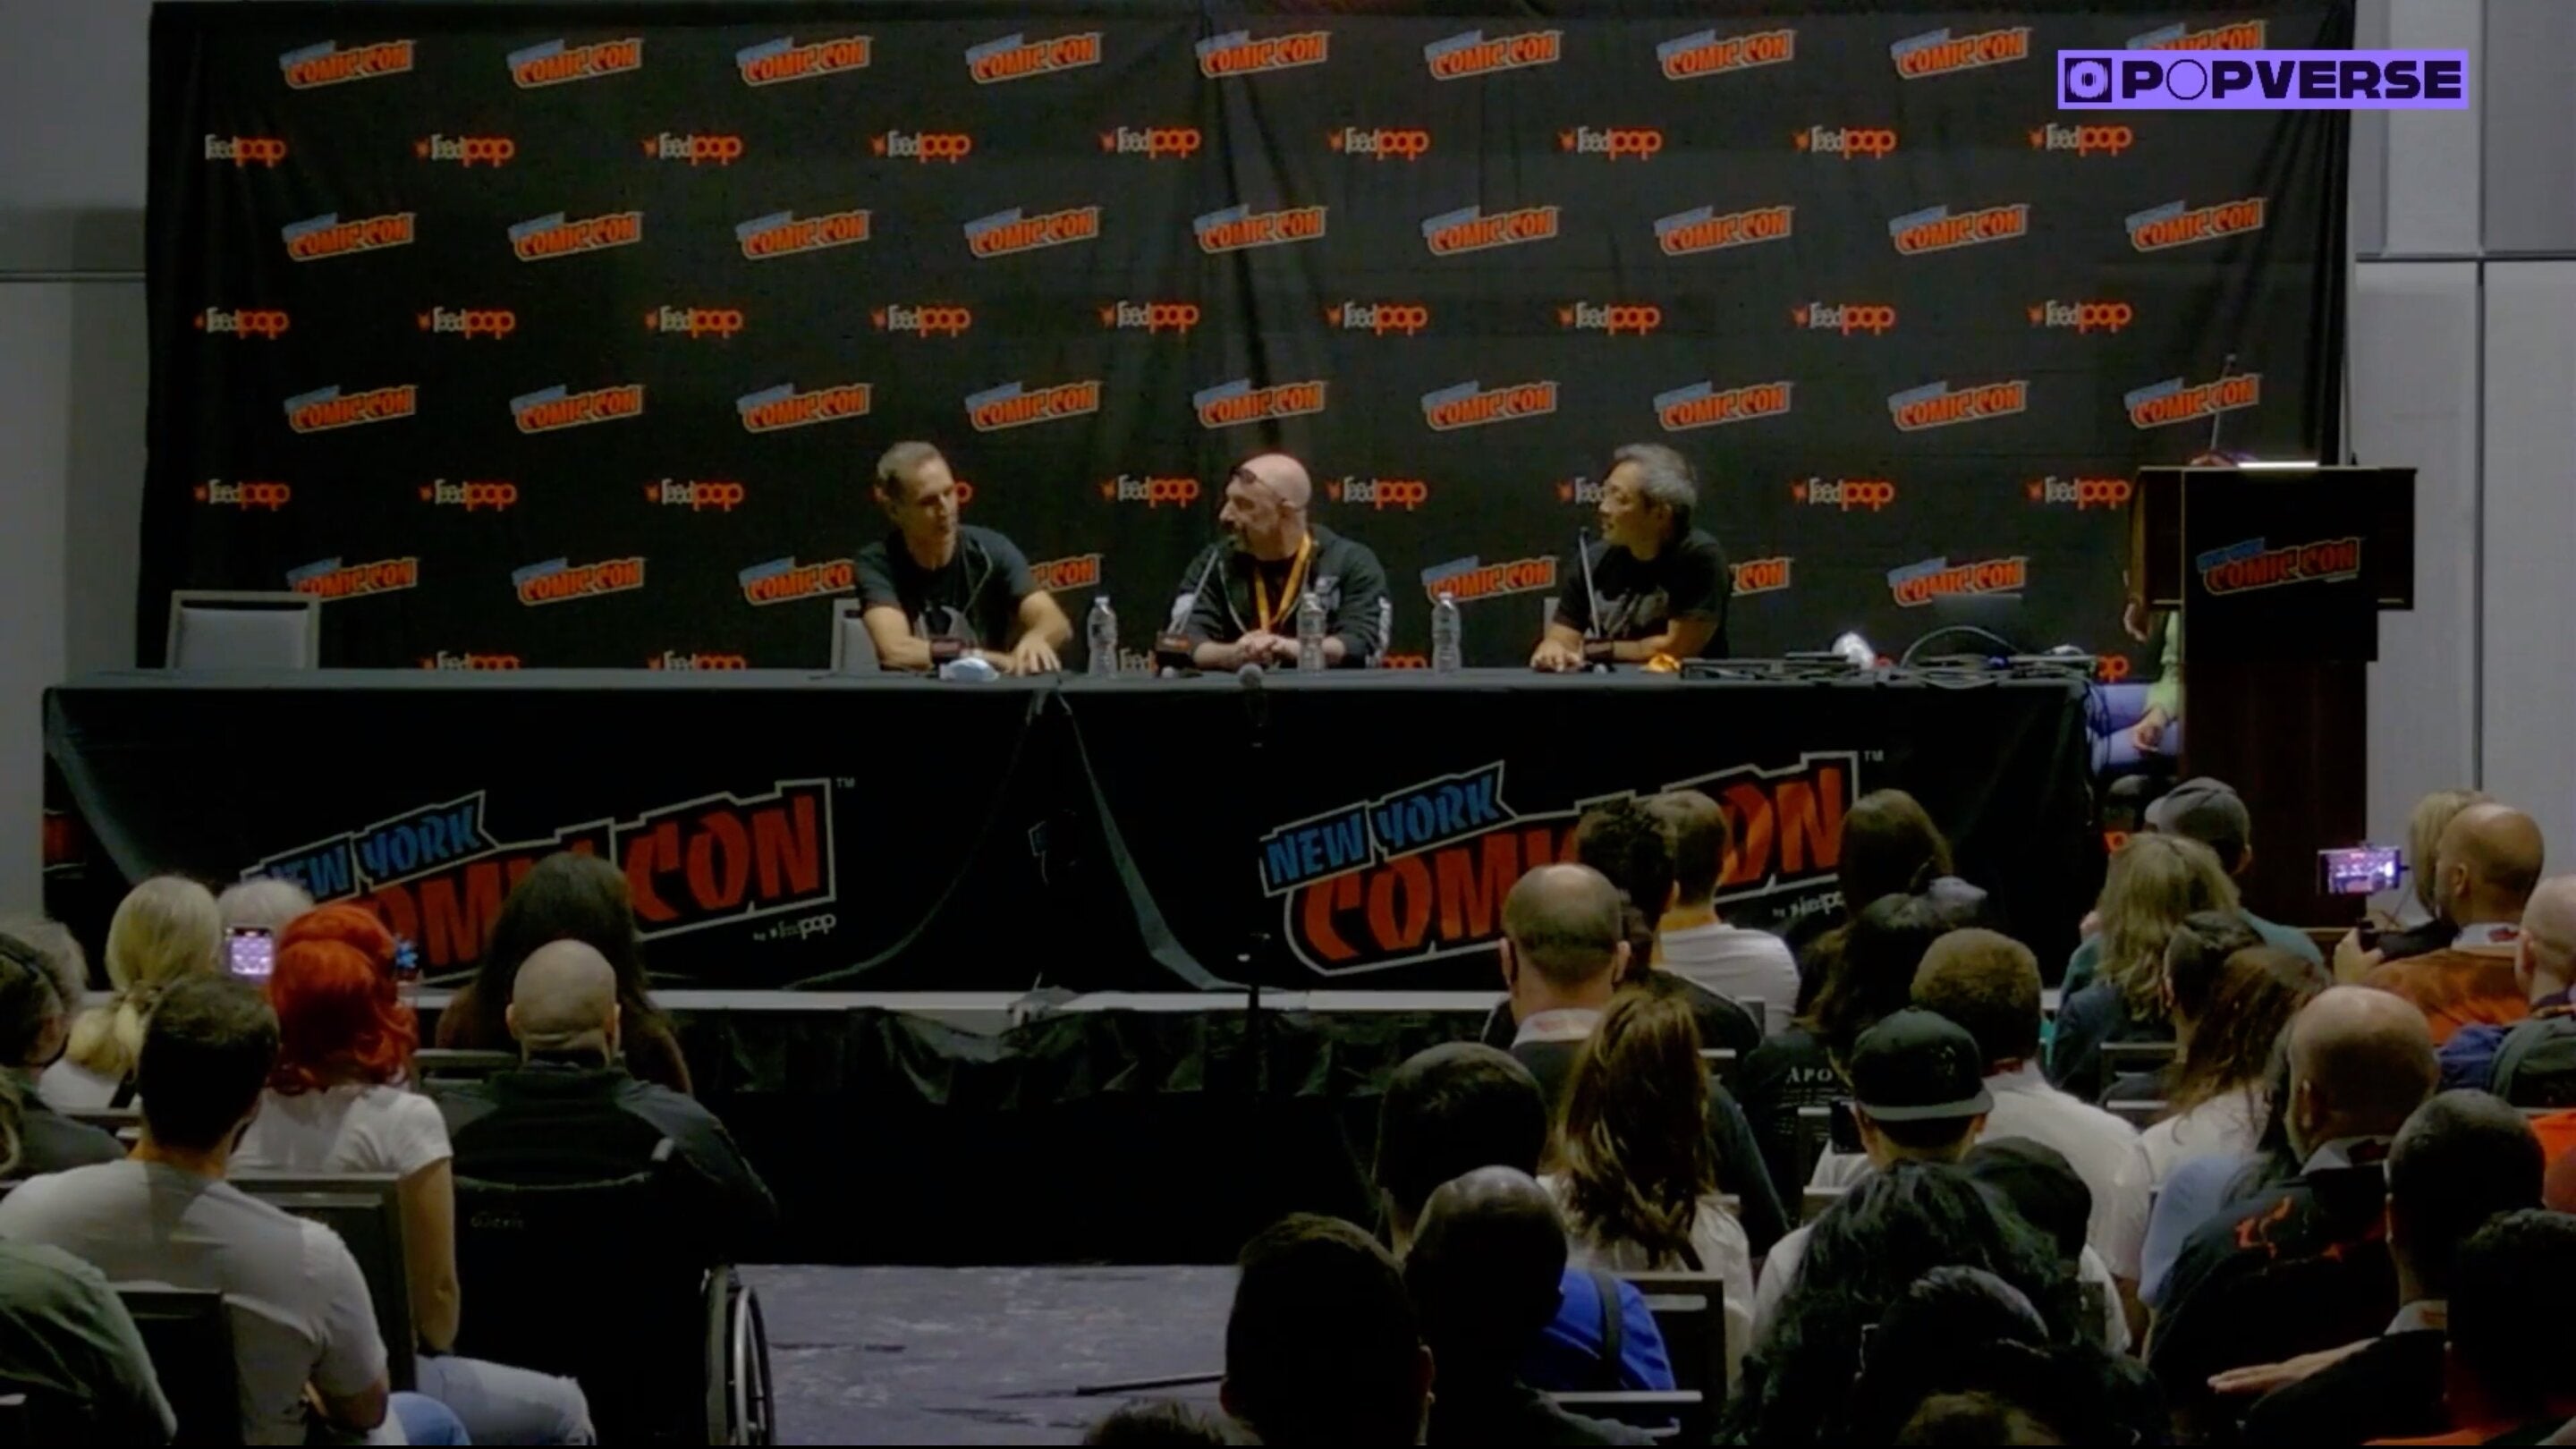 Image for SPAWN turns 30! Watch this year's NYCC celebration panel, featuring Todd McFarlane!